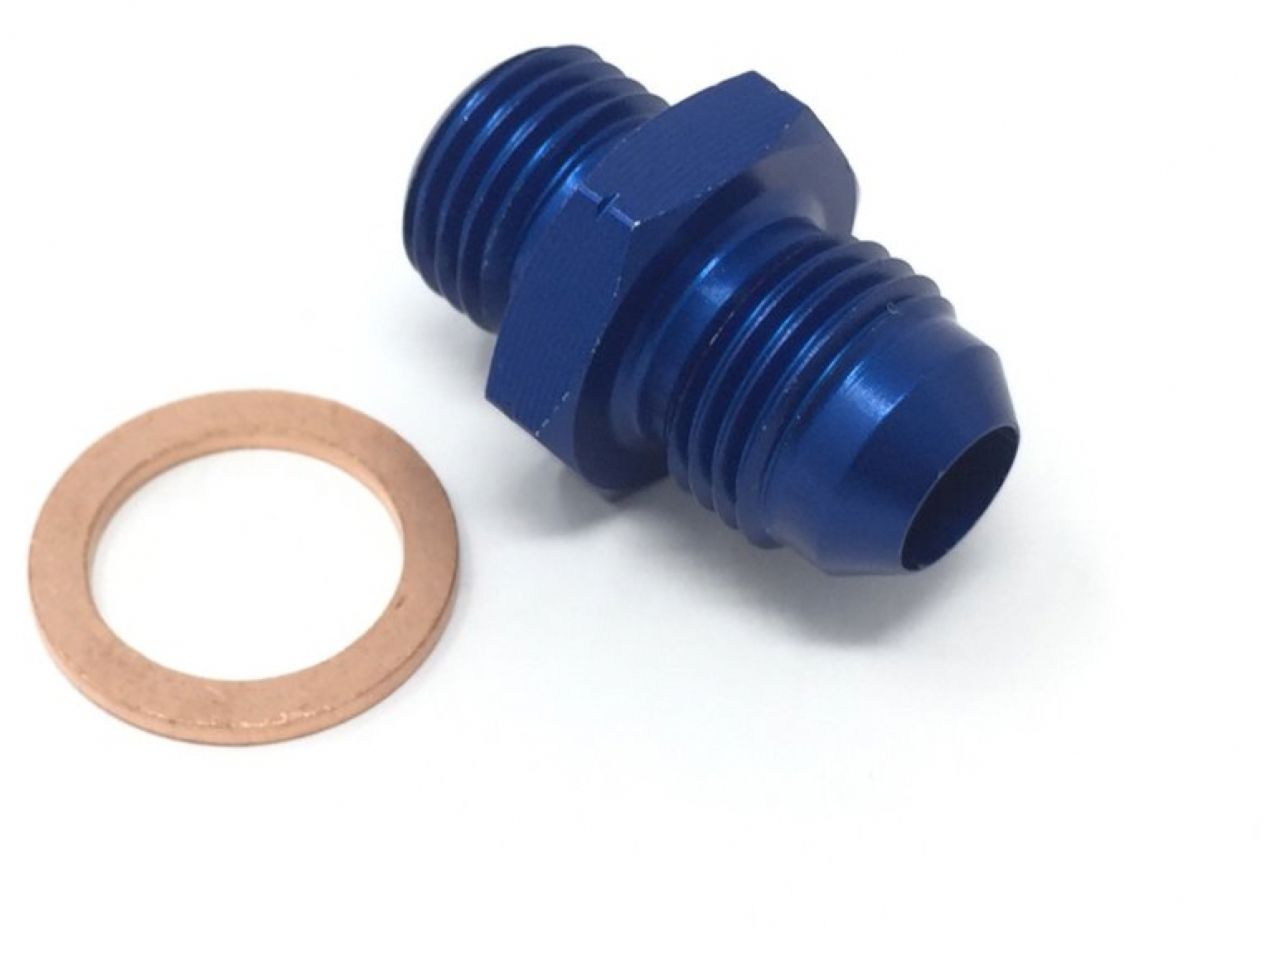 Diftech Fuel Fittings and Adapters 10525 Item Image